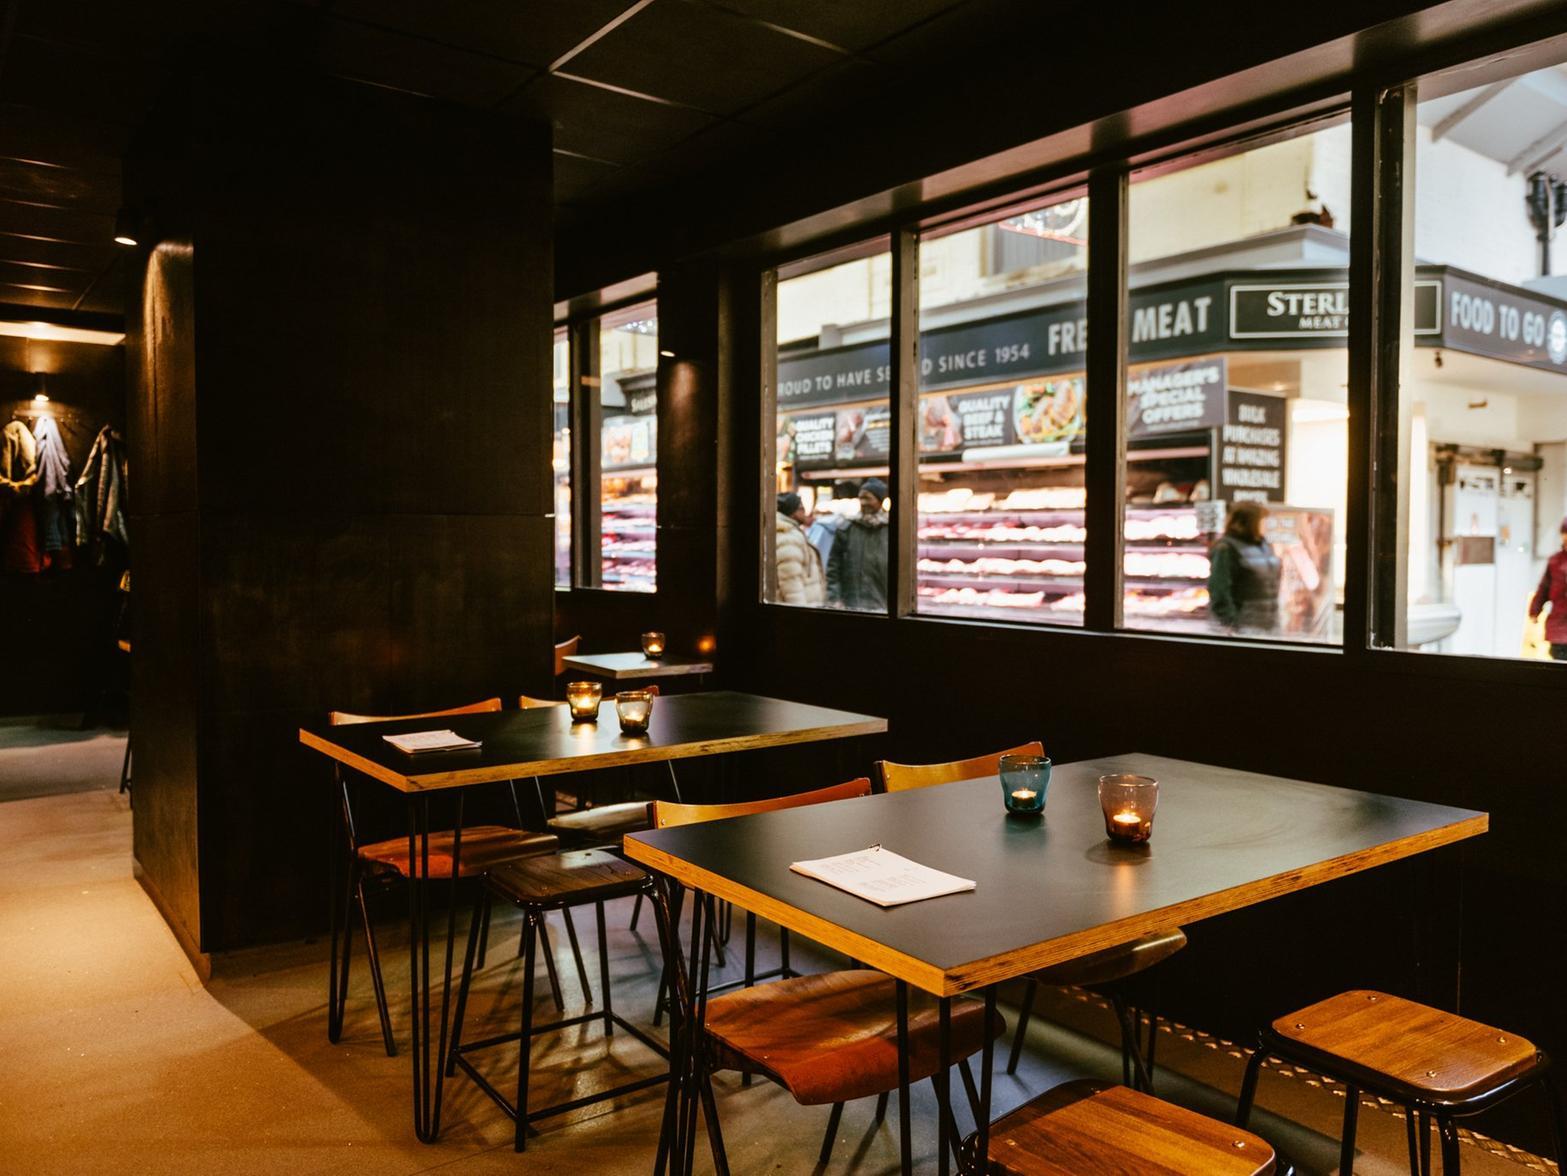 The first pub to ever open its door inside the historic market, gastro pub The Owl, can be found on Fish and Game Row. The venue includes a 44-seater taproom and dining room, masterminded by chefs Liz Cottam and Mark Owens.